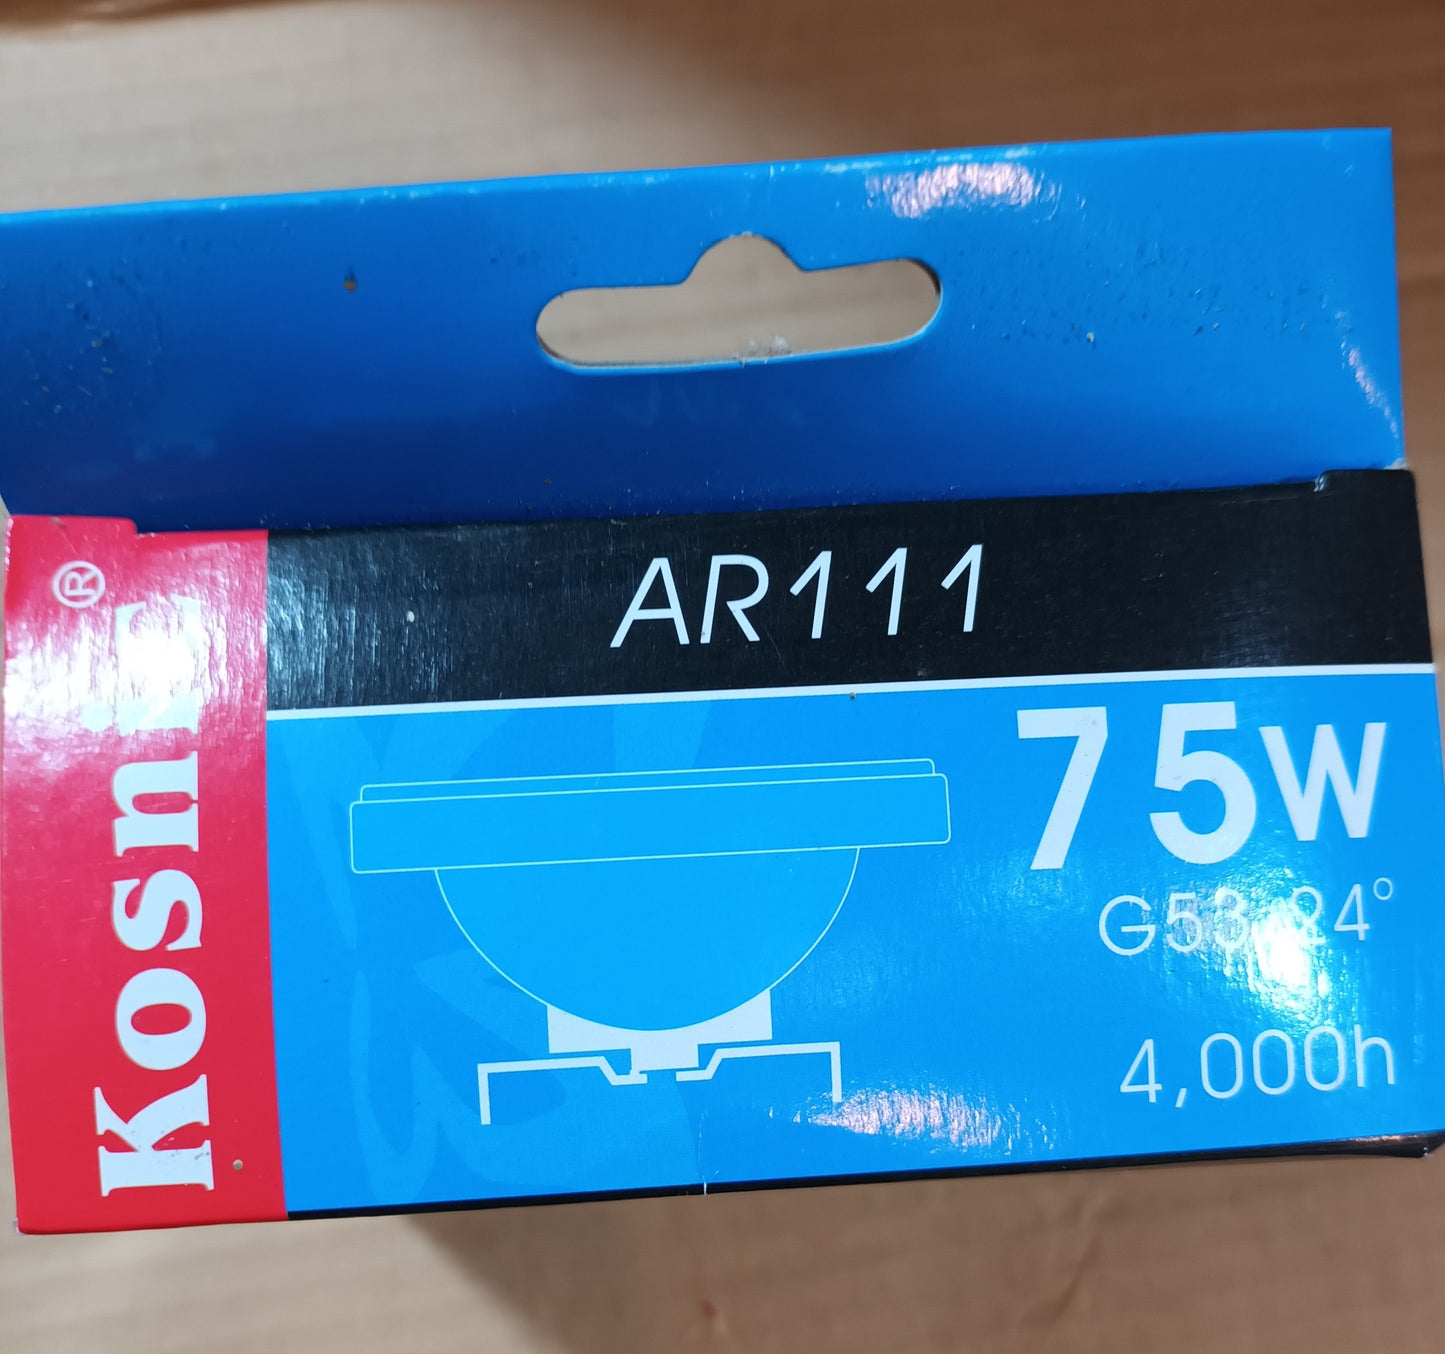 Ar111 75w Halogen Dimmable long life 4,000h by Kosnic